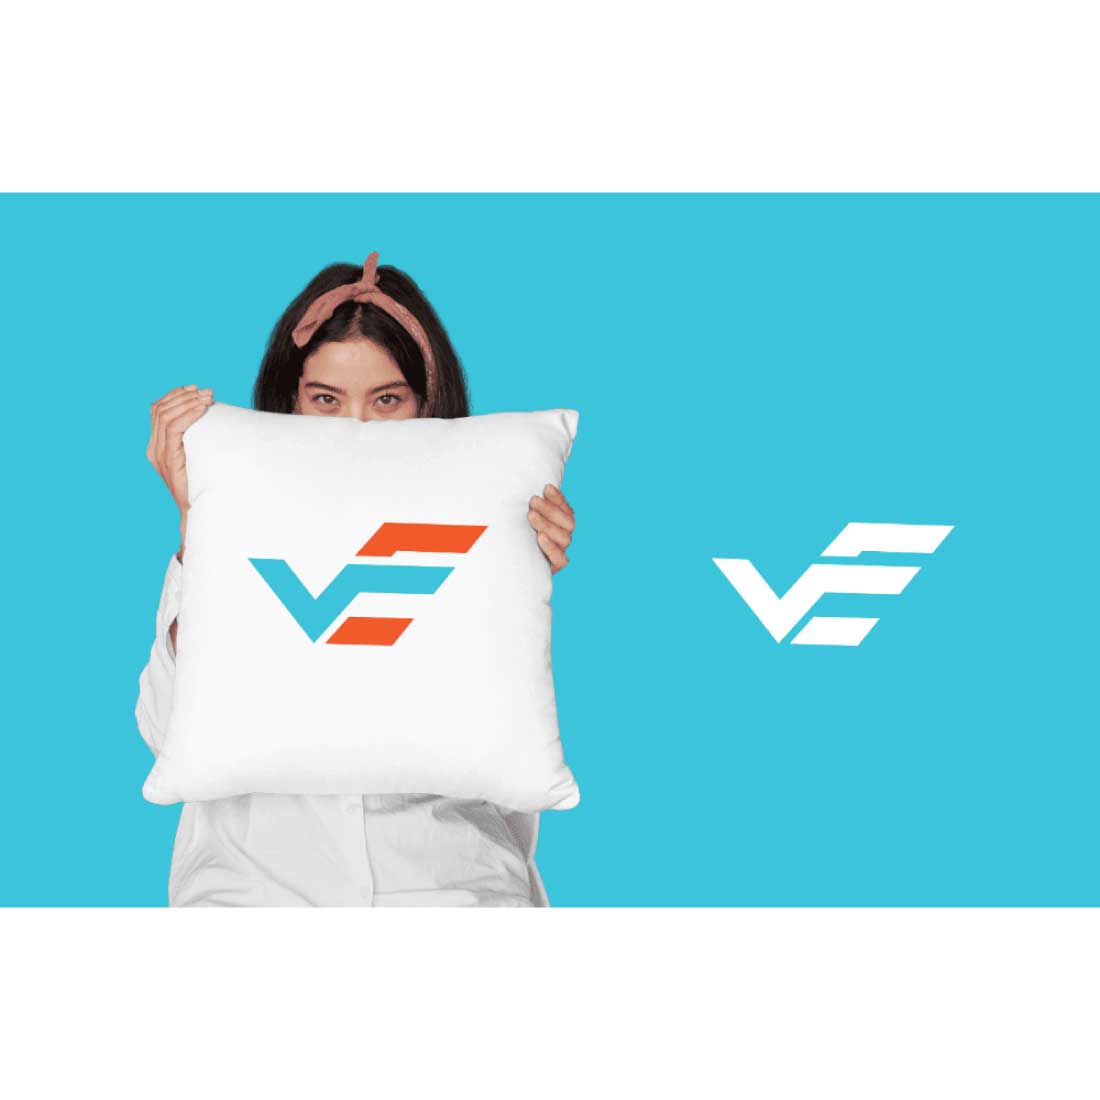 CREATIVE VE Letter Brand Identity Logo Template preview image.